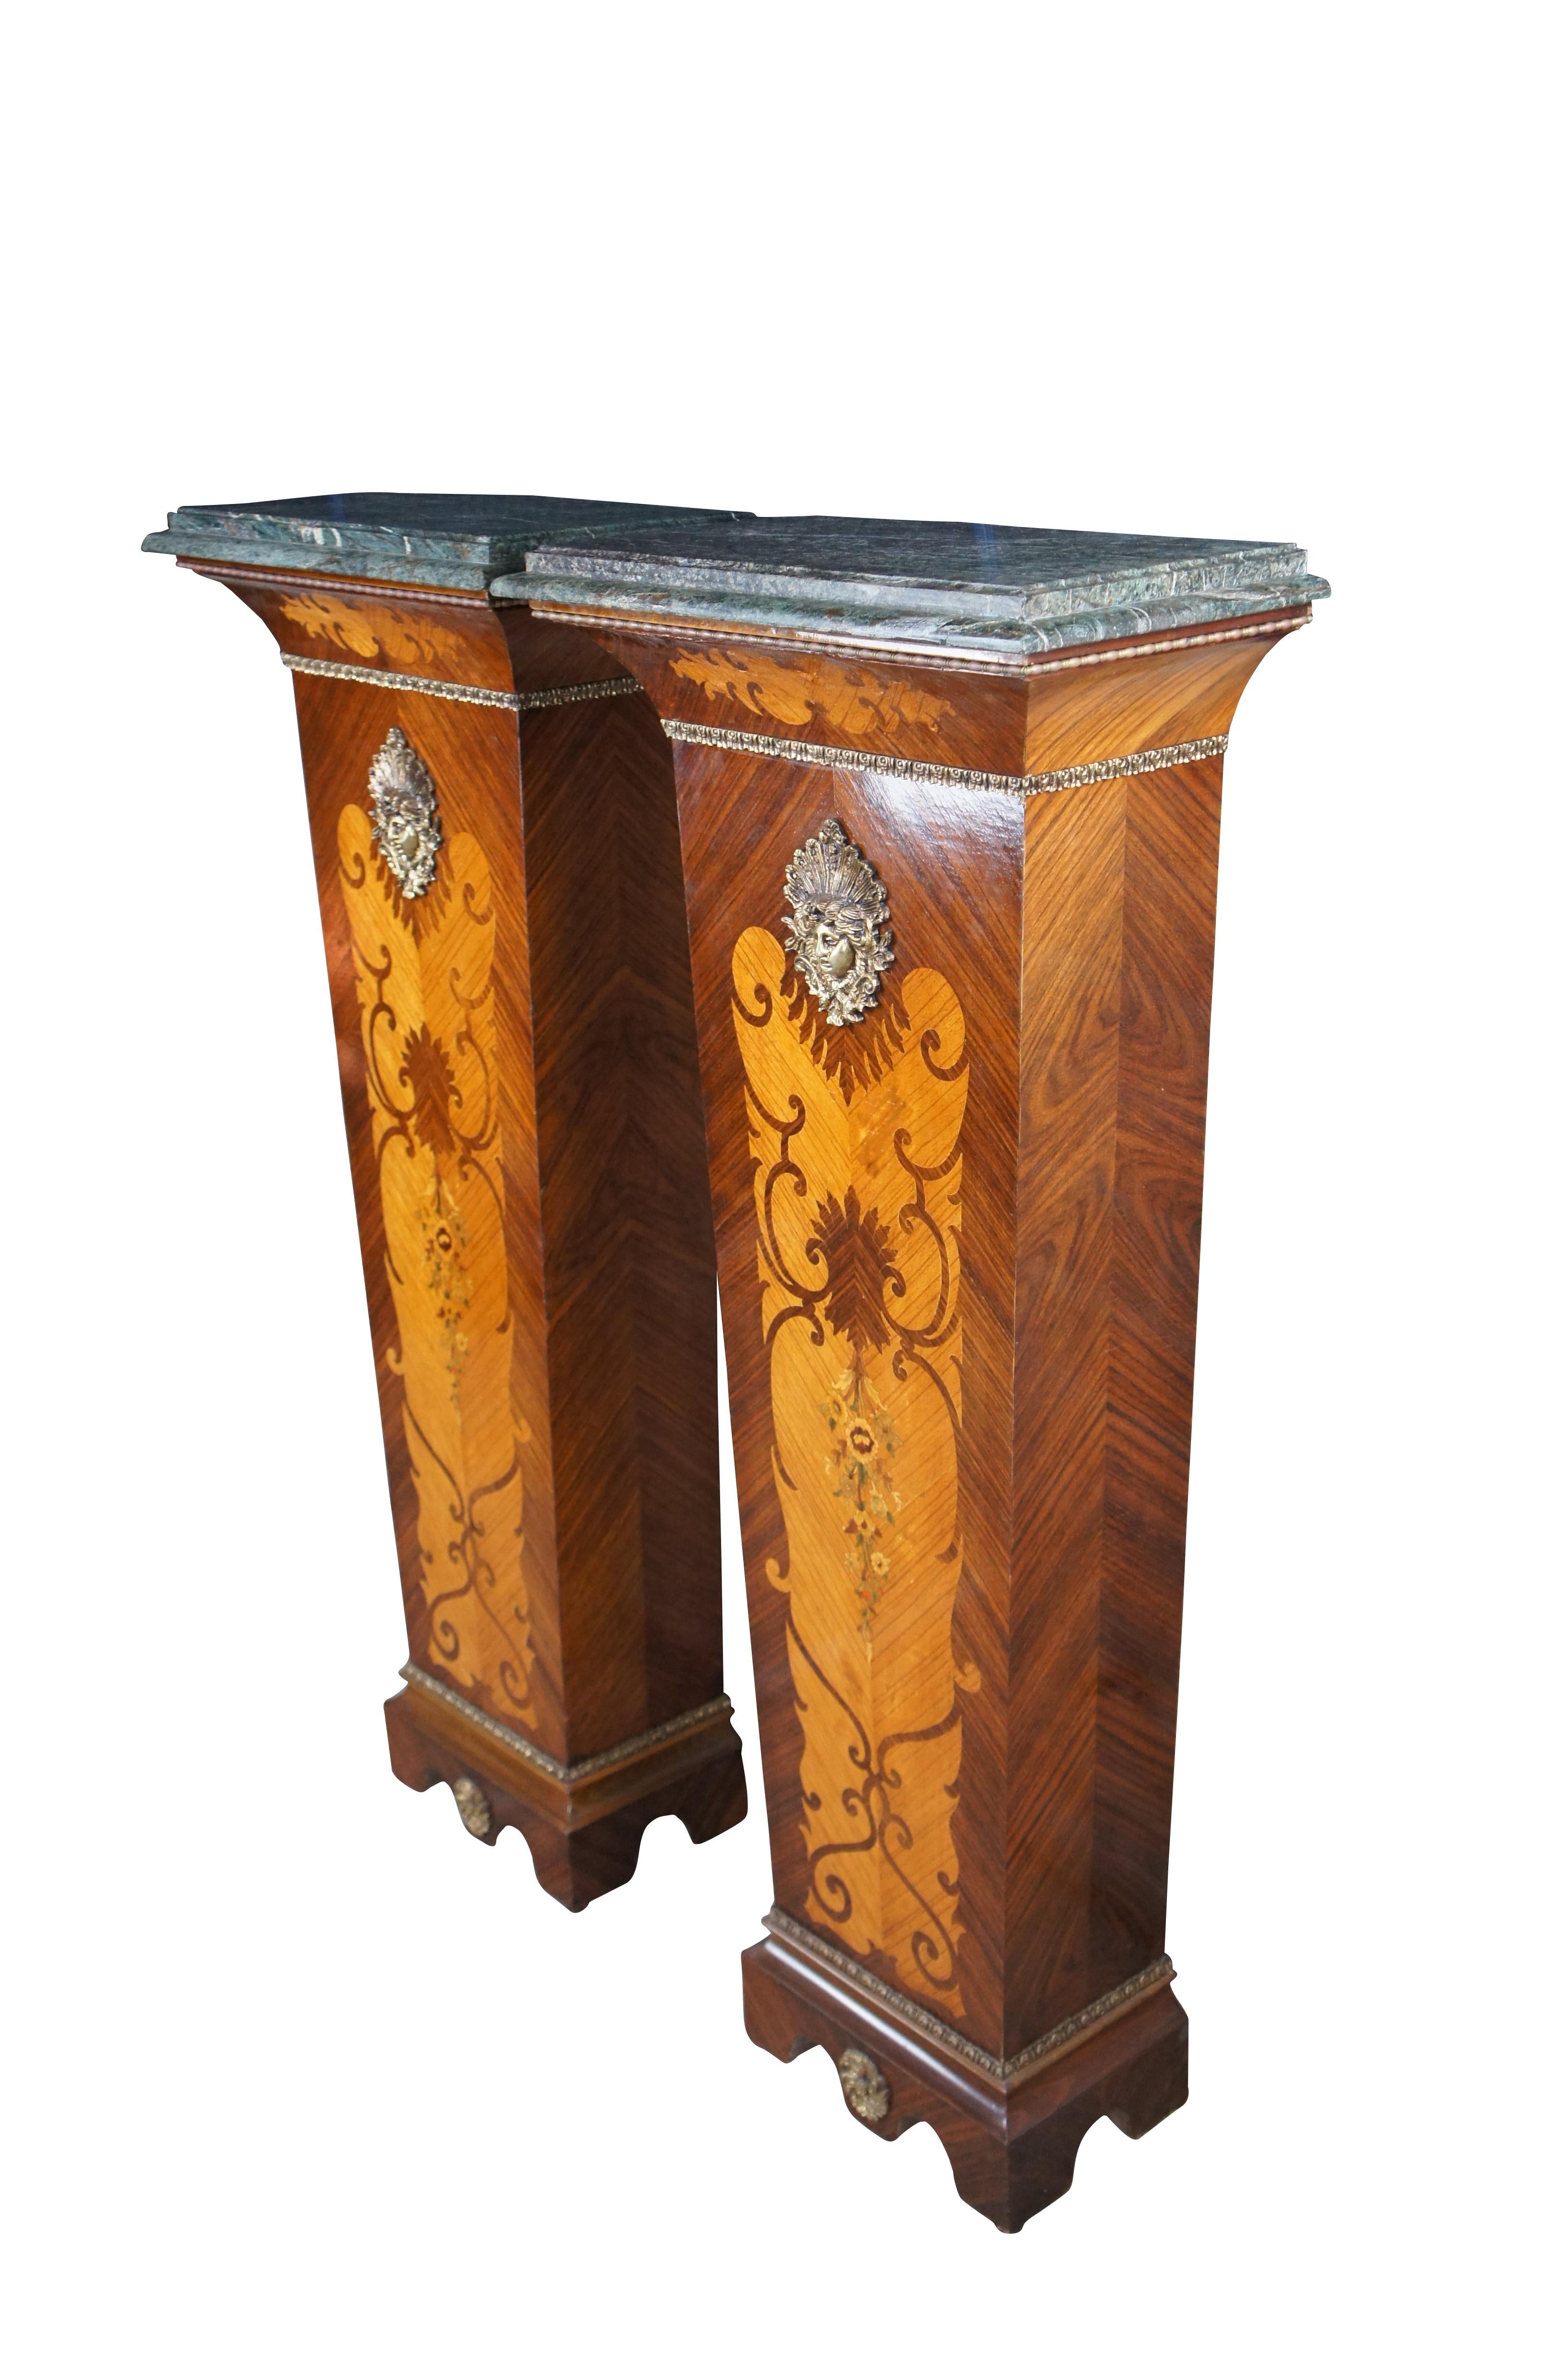 Pair of two French Louis XV style sculpture stands or clock / bust pedestals.  Made of walnut and fruit wood featuring tapered form with inlaid matchbook walnut parquetry design and floral marquetry.  Each features a beveled green marble top, gilded